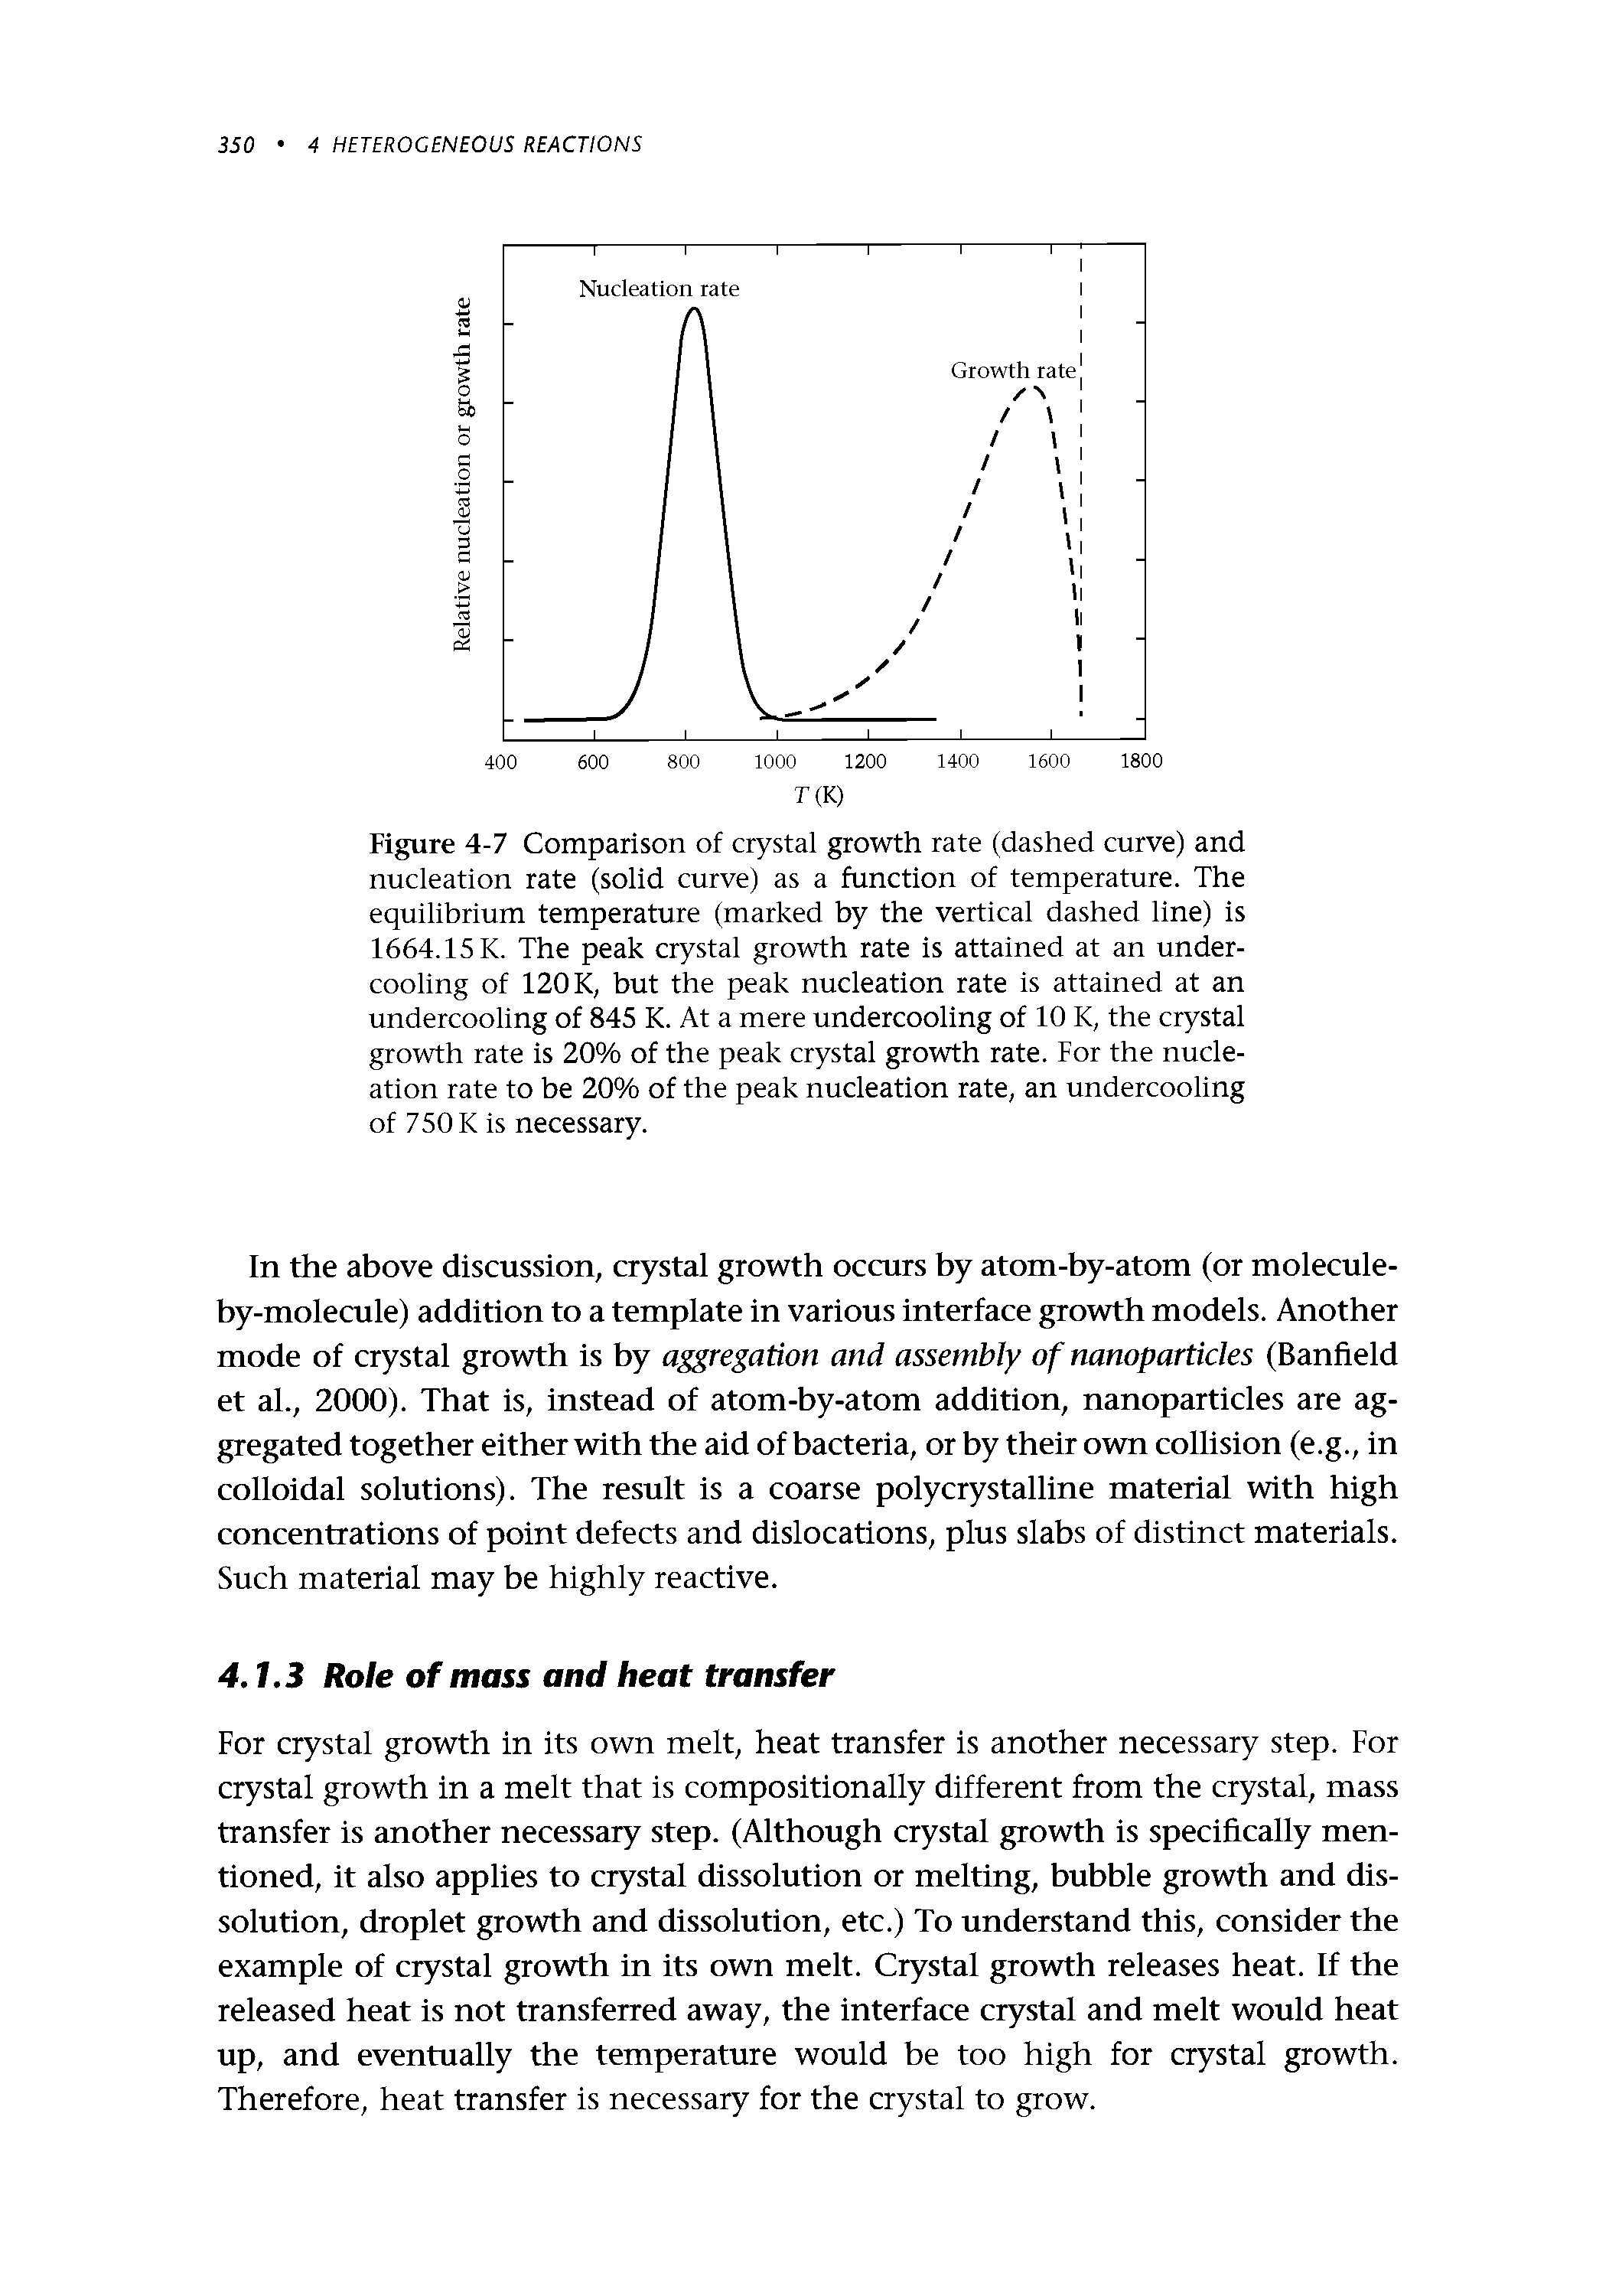 Figure 4-7 Comparison of crystal growth rate (dashed curve) and nucleation rate (solid curve) as a function of temperature. The equilibrium temperature (marked by the vertical dashed line) is 1664.15 K. The peak crystal growth rate is attained at an undercooling of 120 K, but the peak nucleation rate is attained at an undercooling of 845 K. At a mere undercooling of 10 K, the crystal growth rate is 20% of the peak crystal growth rate. For the nucleation rate to be 20% of the peak nucleation rate, an undercooling of 750 K is necessary.